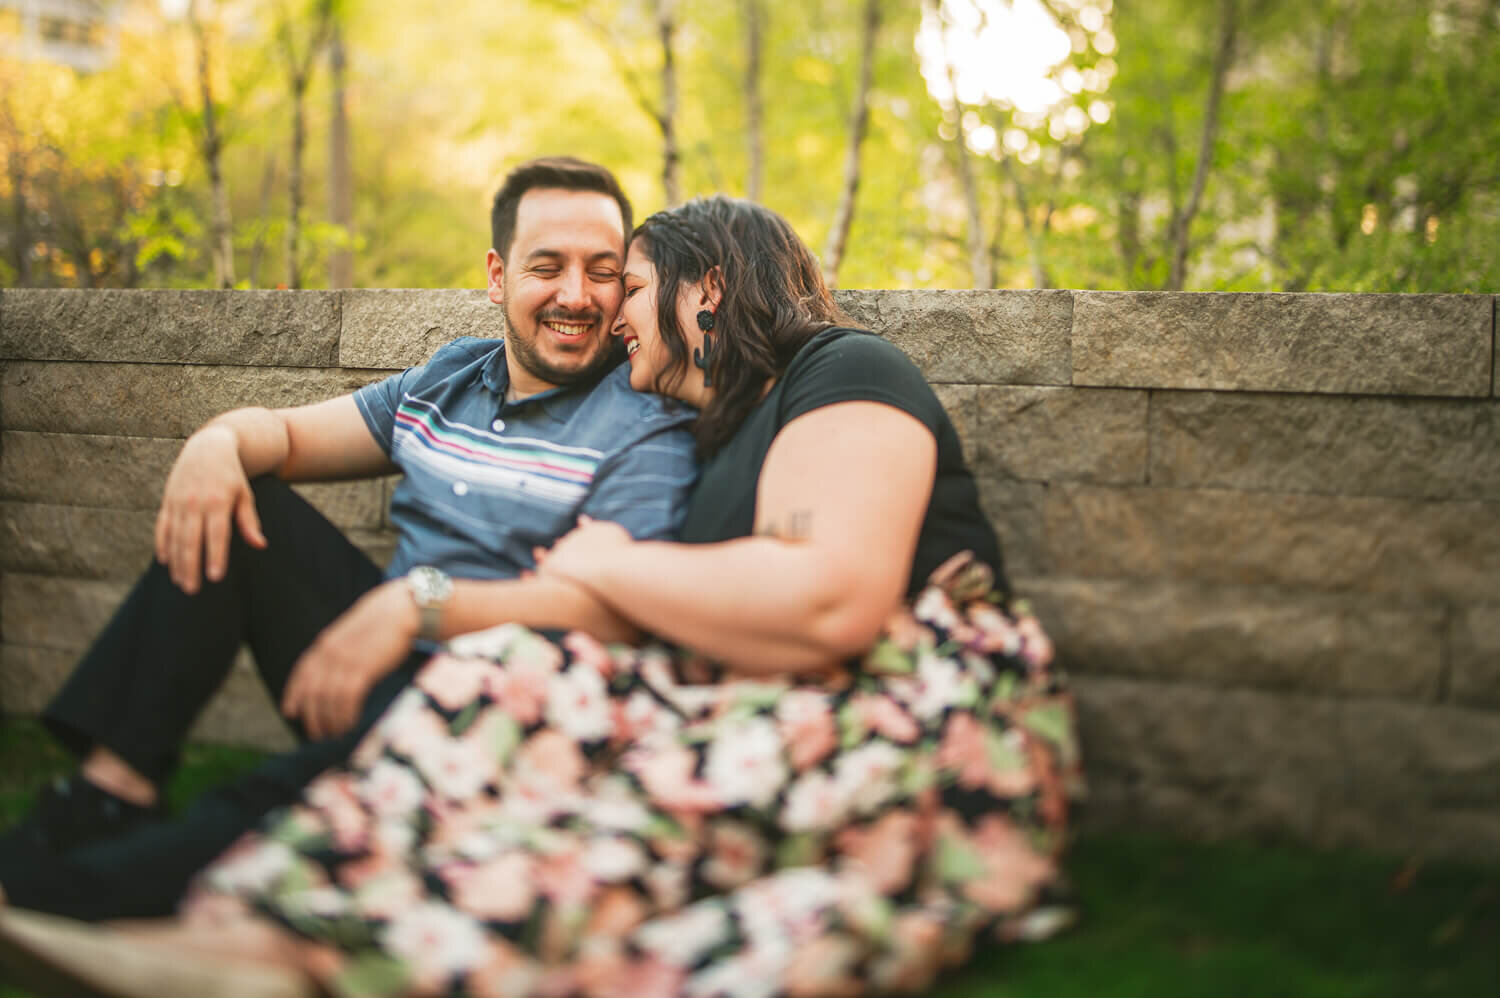 st louis city garden engagement session becky and michael-7.jpg